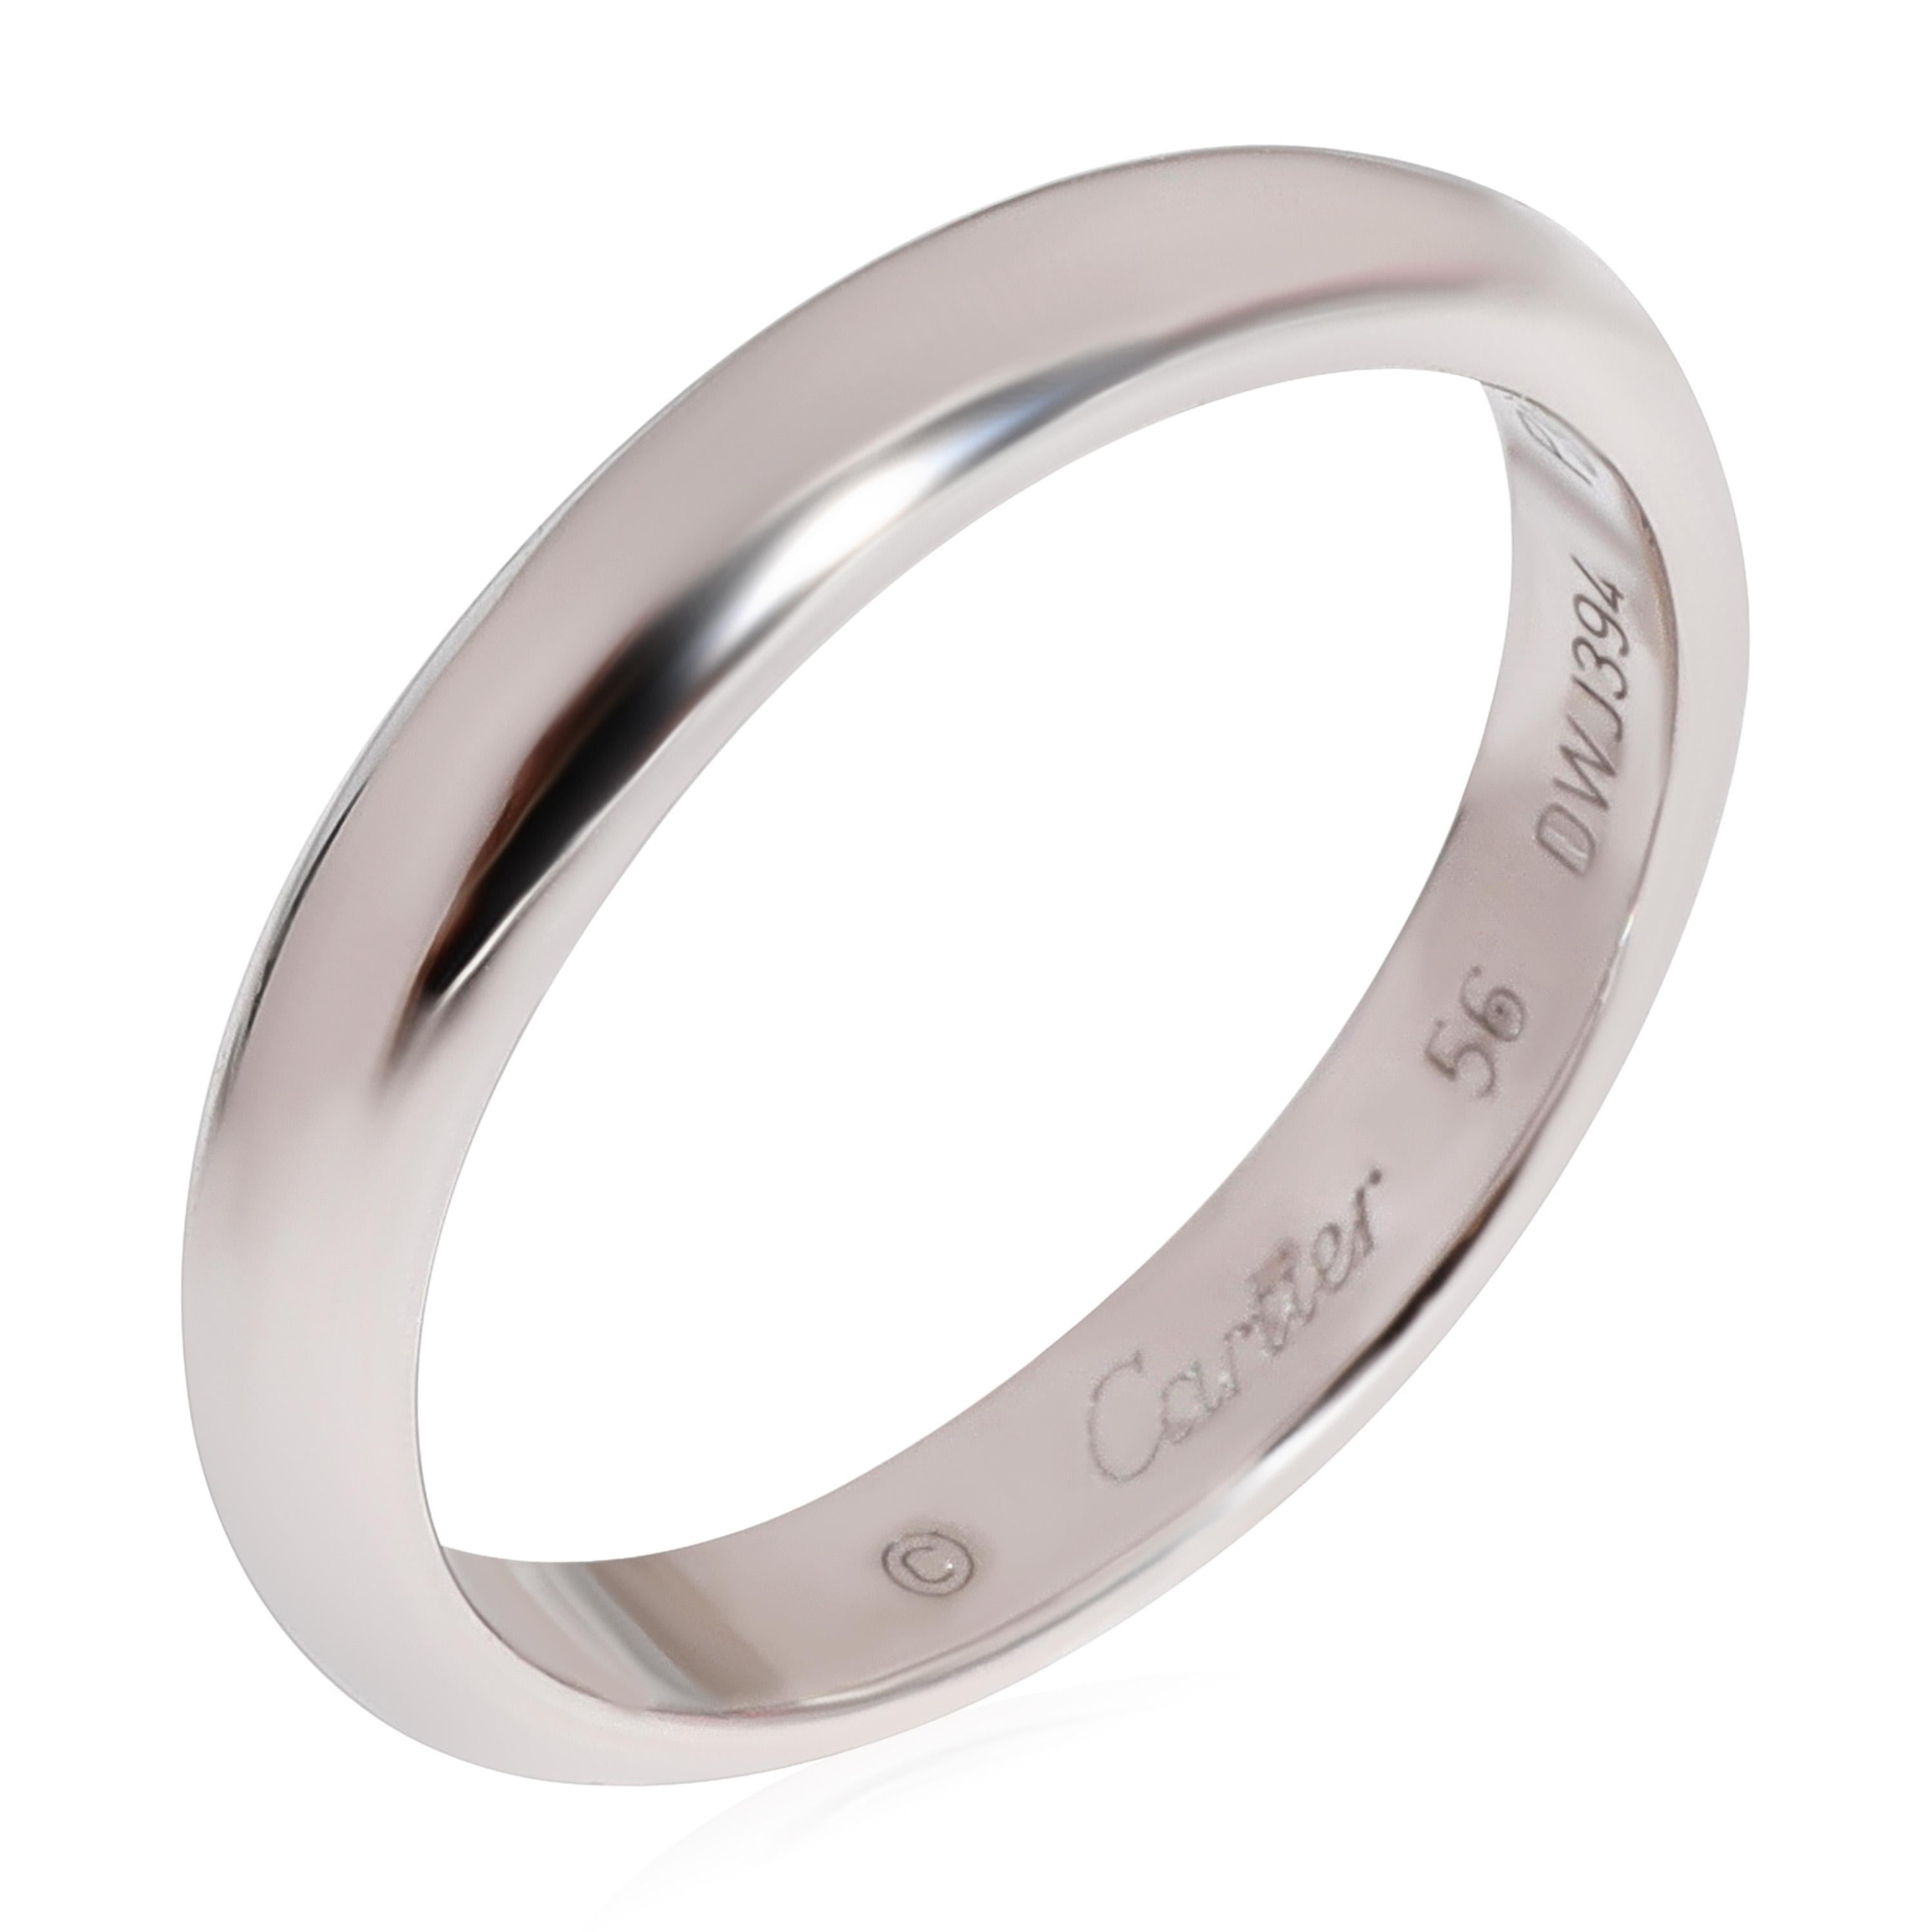 Cartier 1895 Wedding Band in 950 Platinum

PRIMARY DETAILS
SKU: 122349
Listing Title: Cartier 1895 Wedding Band in 950 Platinum
Condition Description: Retails for 1700 USD. In excellent condition and recently polished. Ring size is 7.5.Comes with